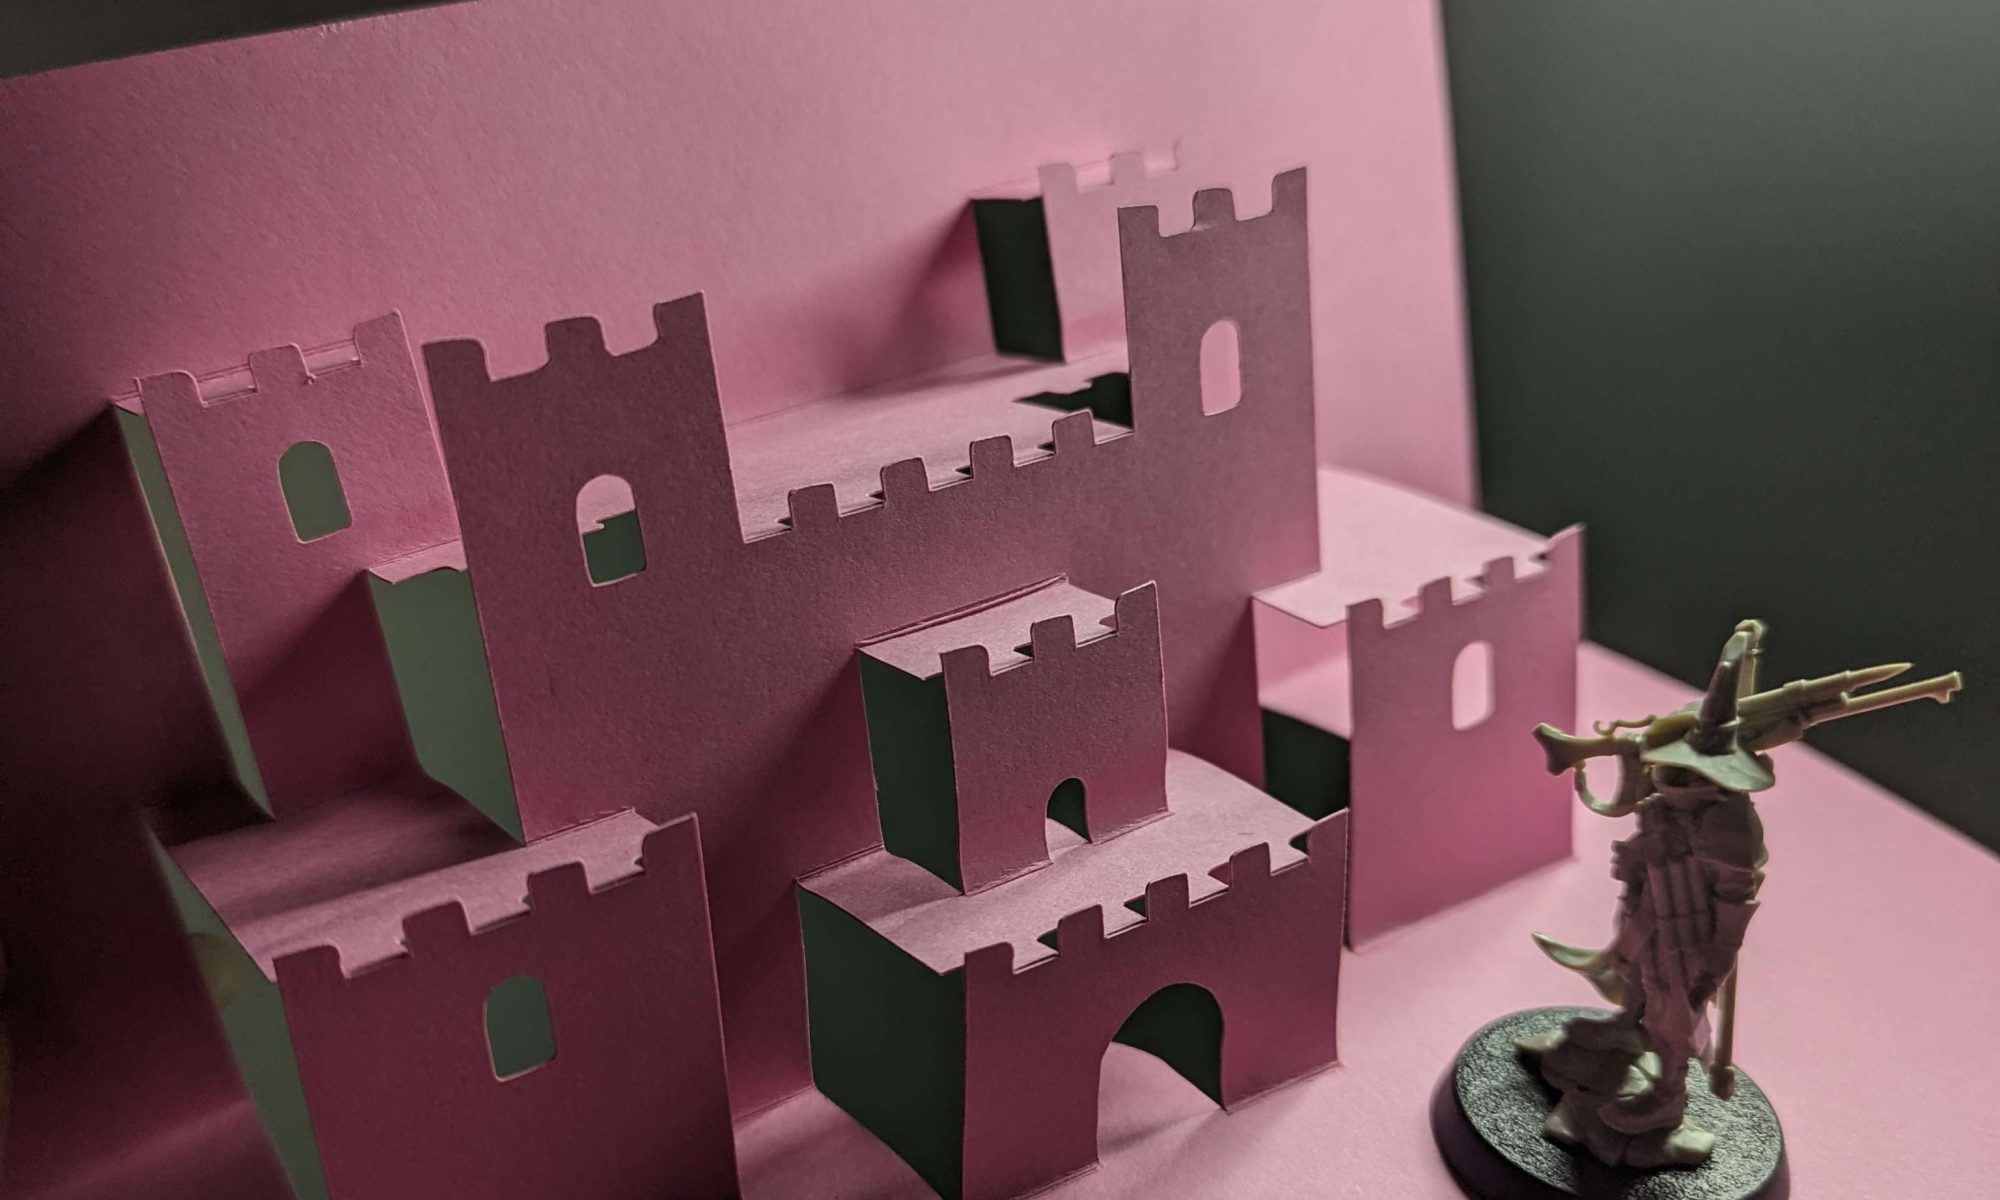 a figurine with a wizard hat and a gun stands next to a three-tiered pop up castle made by folding a single sheet of pink cardstock 90 degrees.